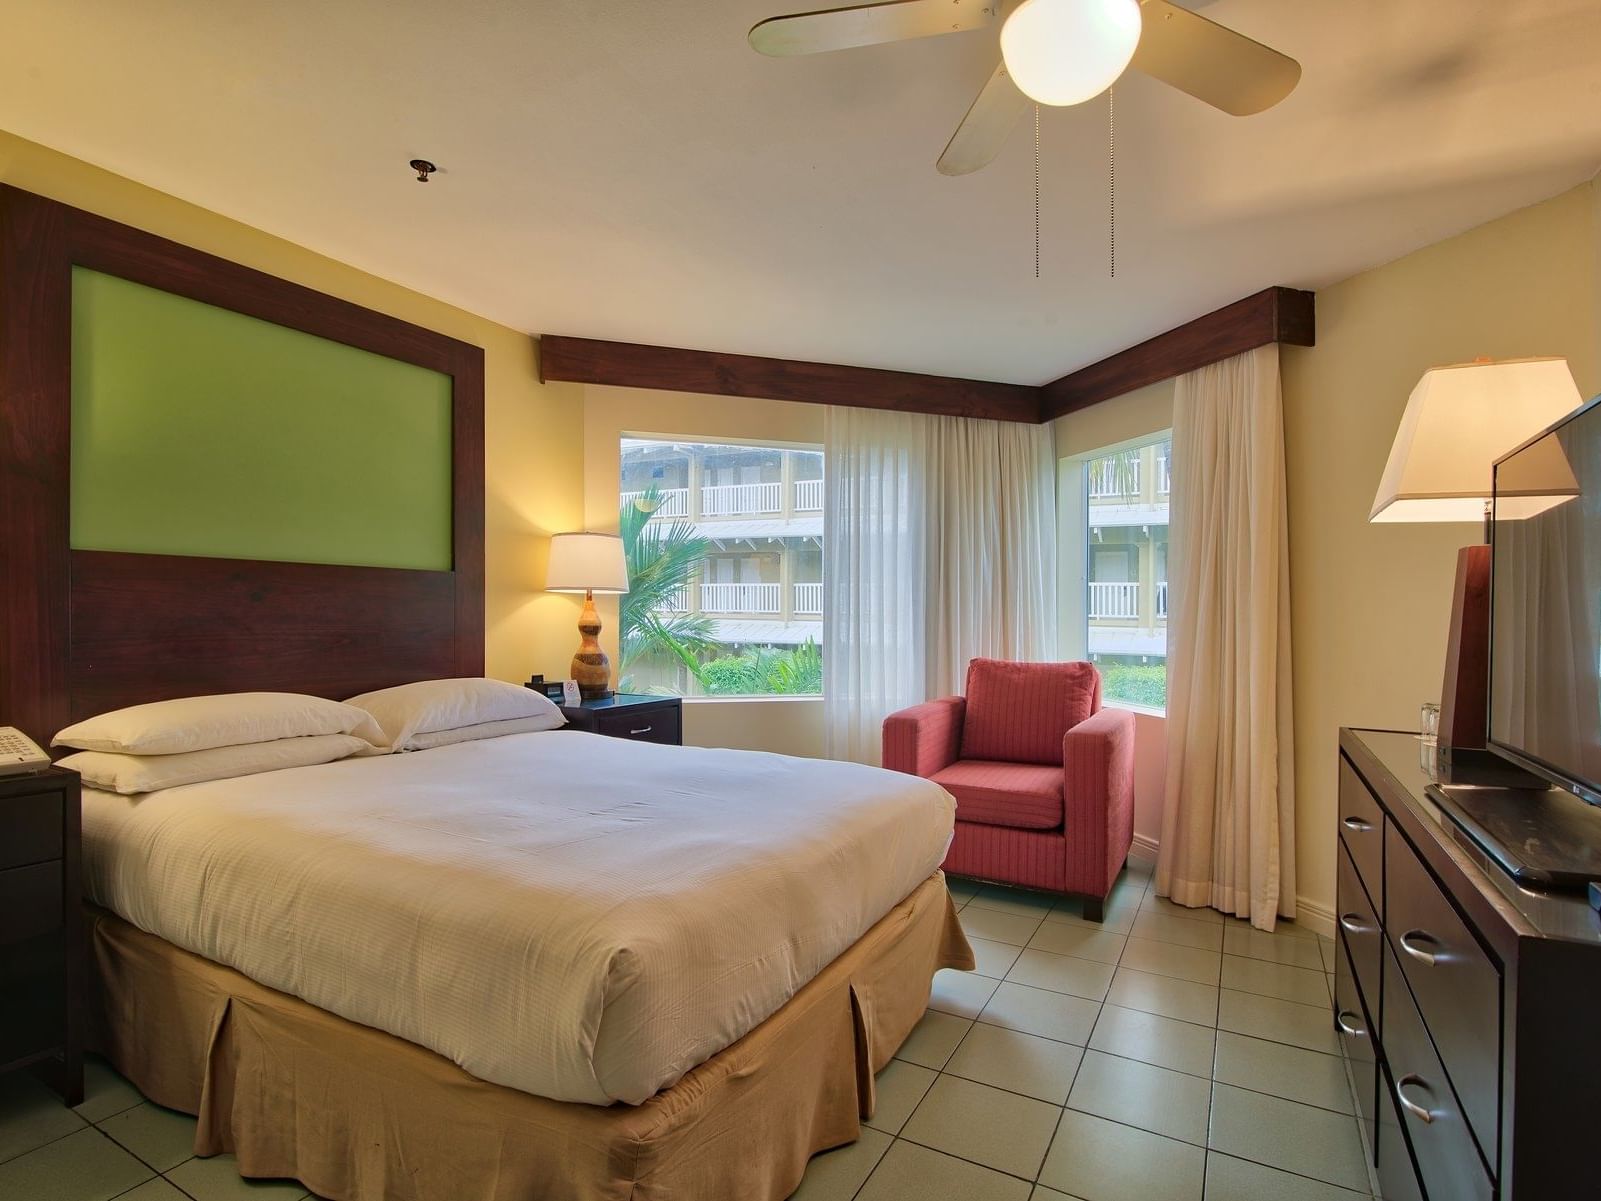 Jr Suite Garden View Room with a comfy bed at Fiesta Resort